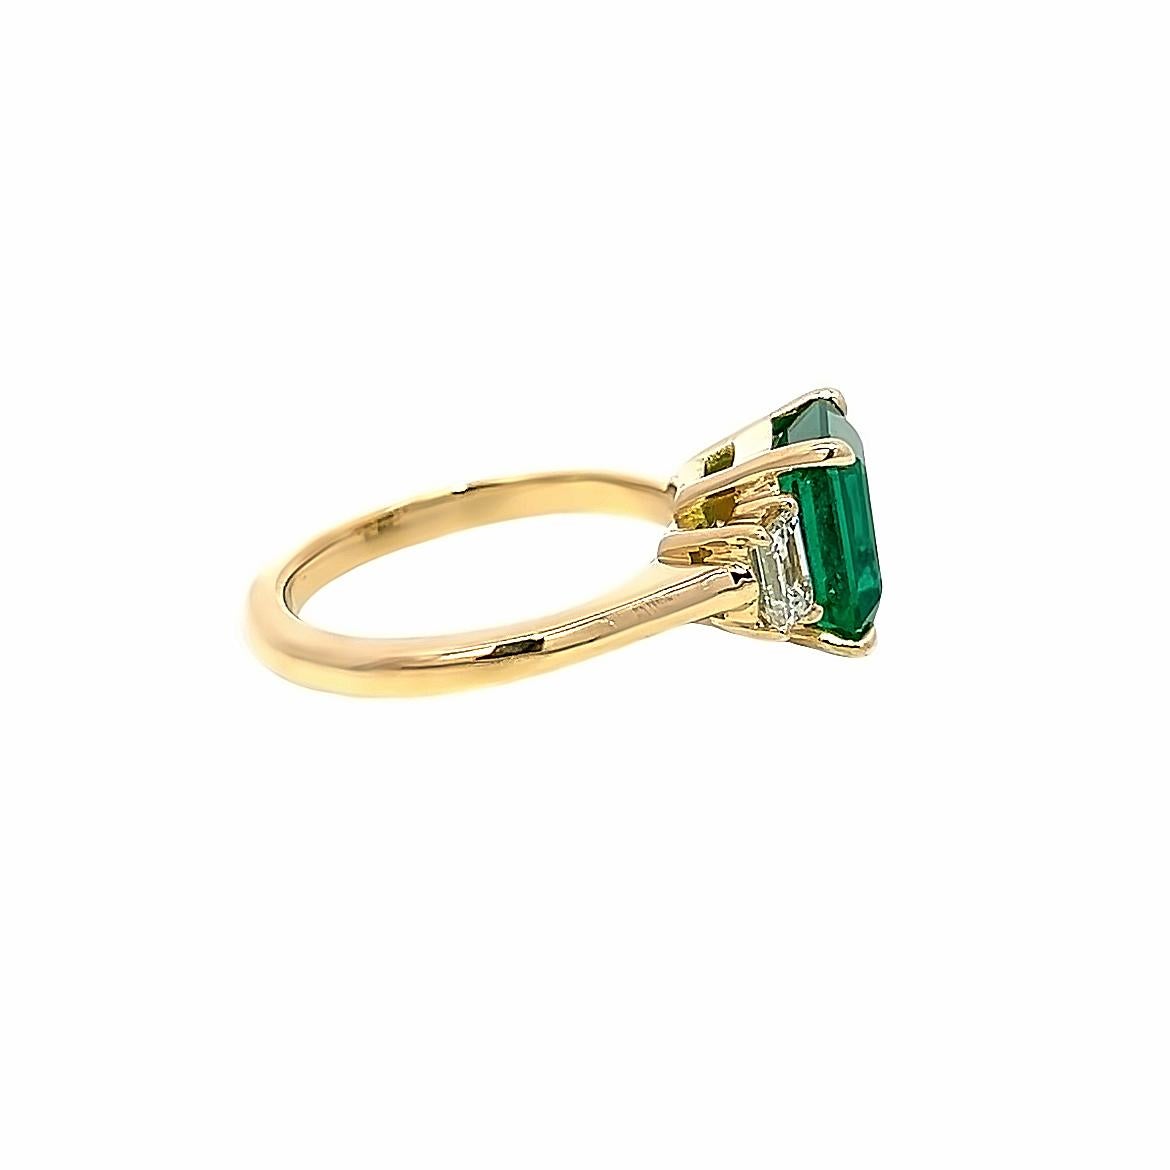 Aesthetic Movement 1.98CT Octagonal Emerald with Diamonds Ring, GIA Certified, set in 18K YG For Sale